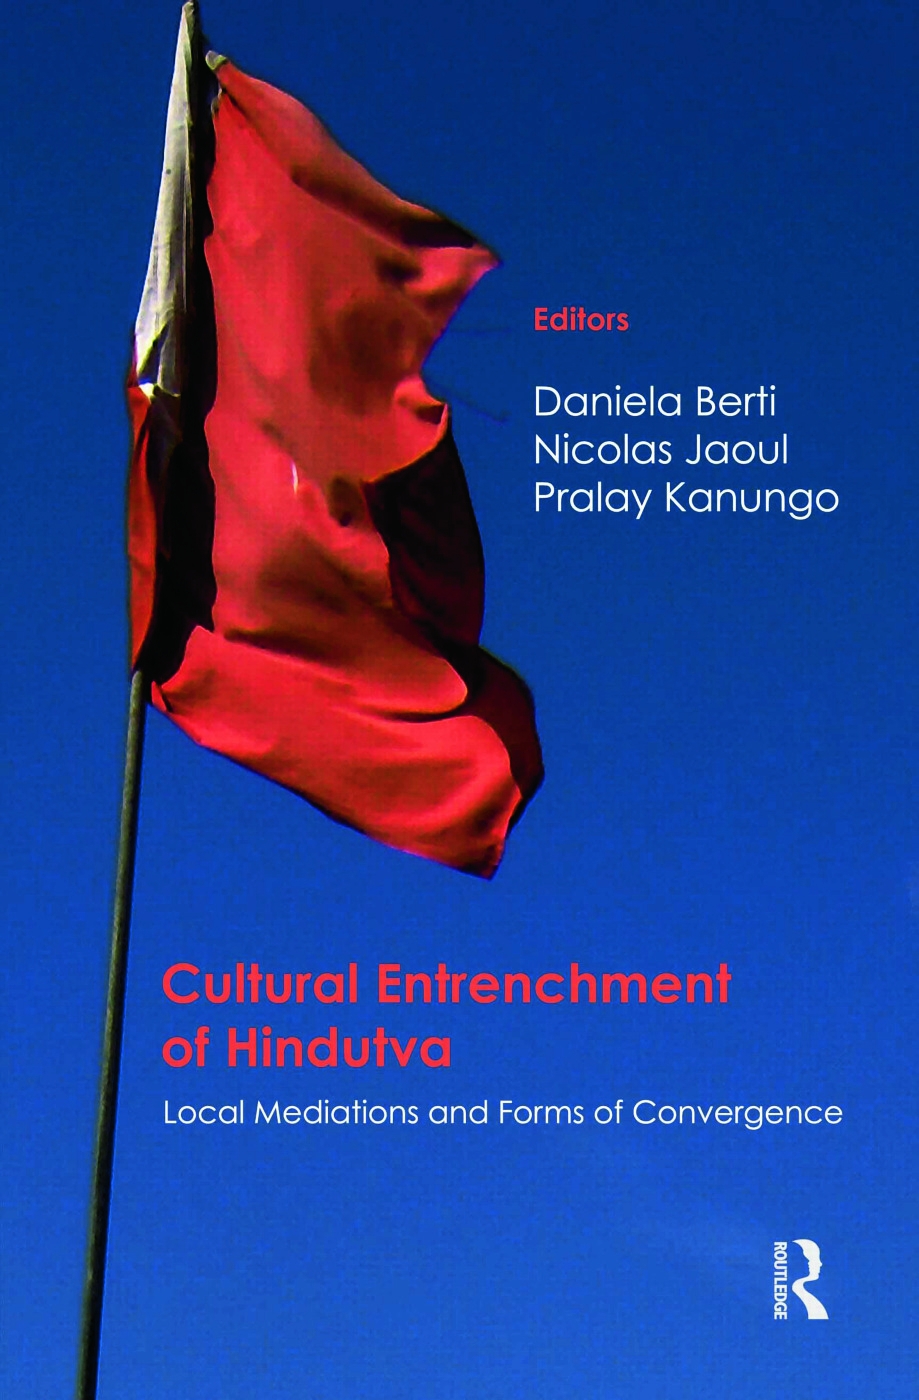 Cultural Entrenchment of Hindutva: Local Mediations and Forms of Convergence